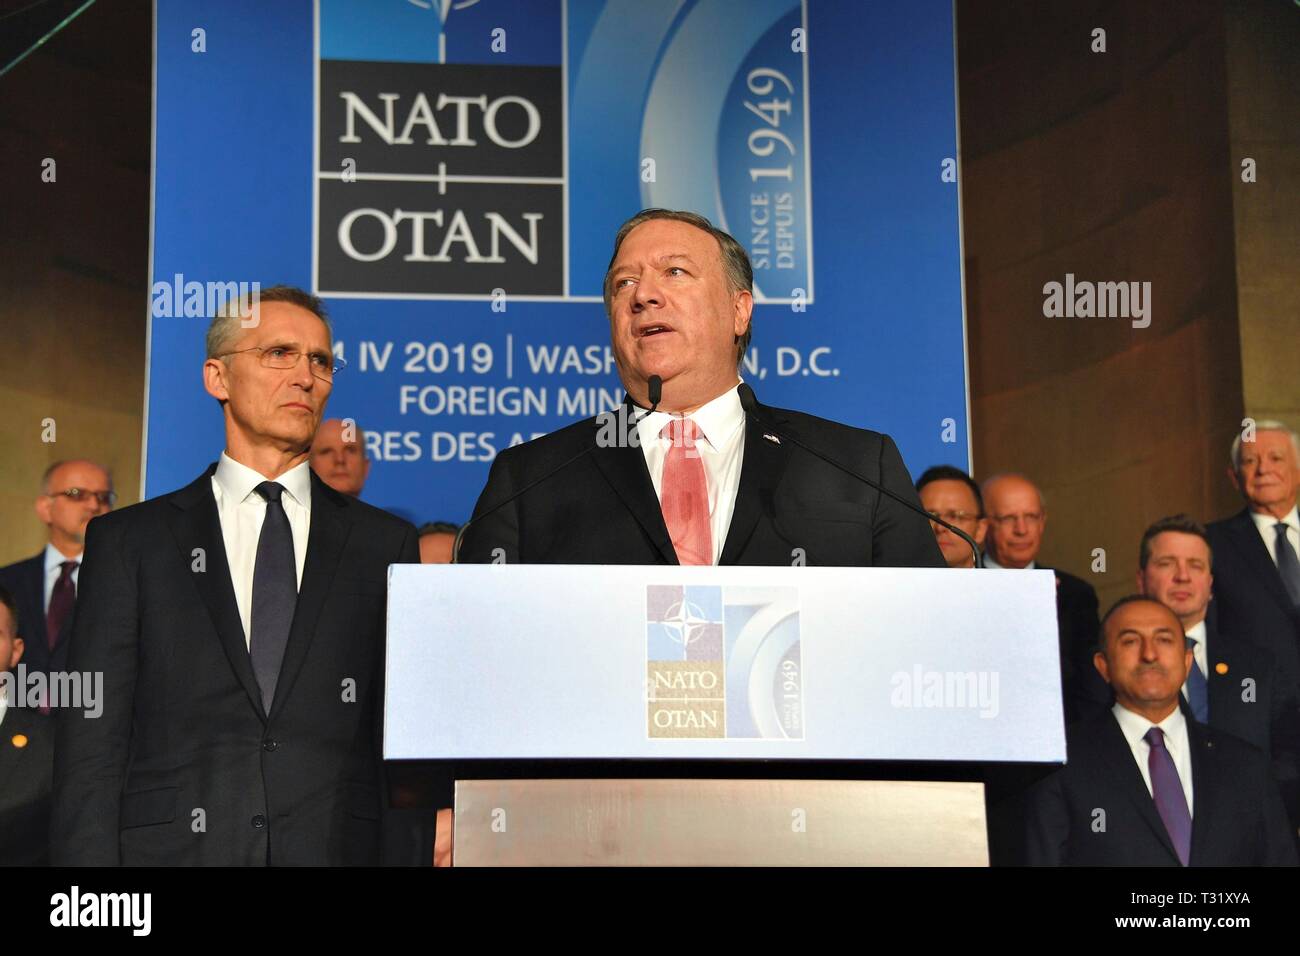 U.S. Secretary of State Mike Pompeo delivers remarks at a reception to celebrate NATO's 70th Anniversary at Andrew W. Mellon Auditorium April 3, 2019 in Washington, D.C. NATO Secretary General Jens Stoltenberg, left, stands next to Pompeo. Stock Photo